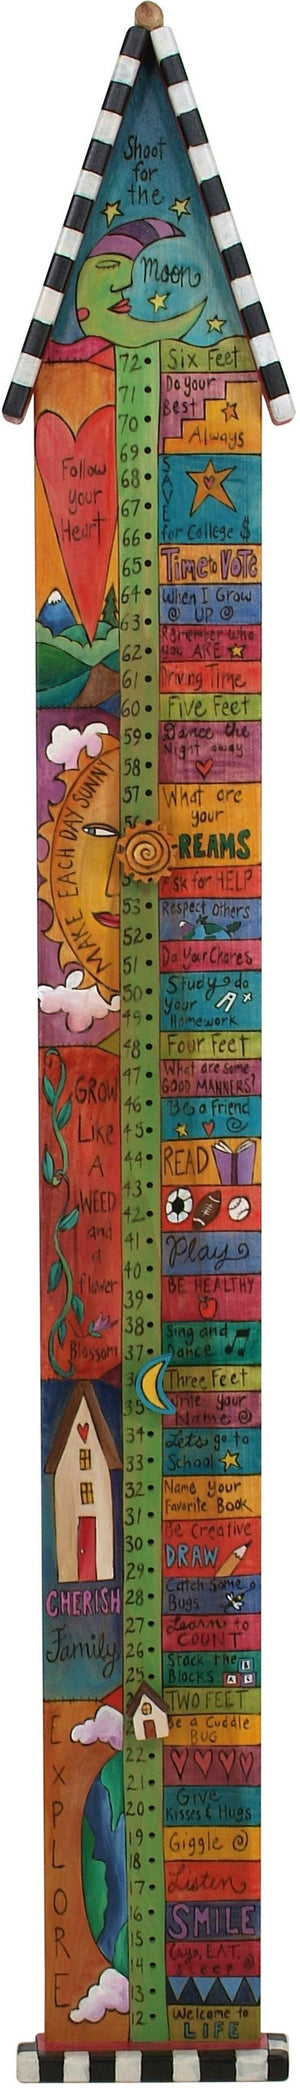 Growth Chart with Pegs –  "Make Each Day Count" growth chart with pegs with mister moon motif